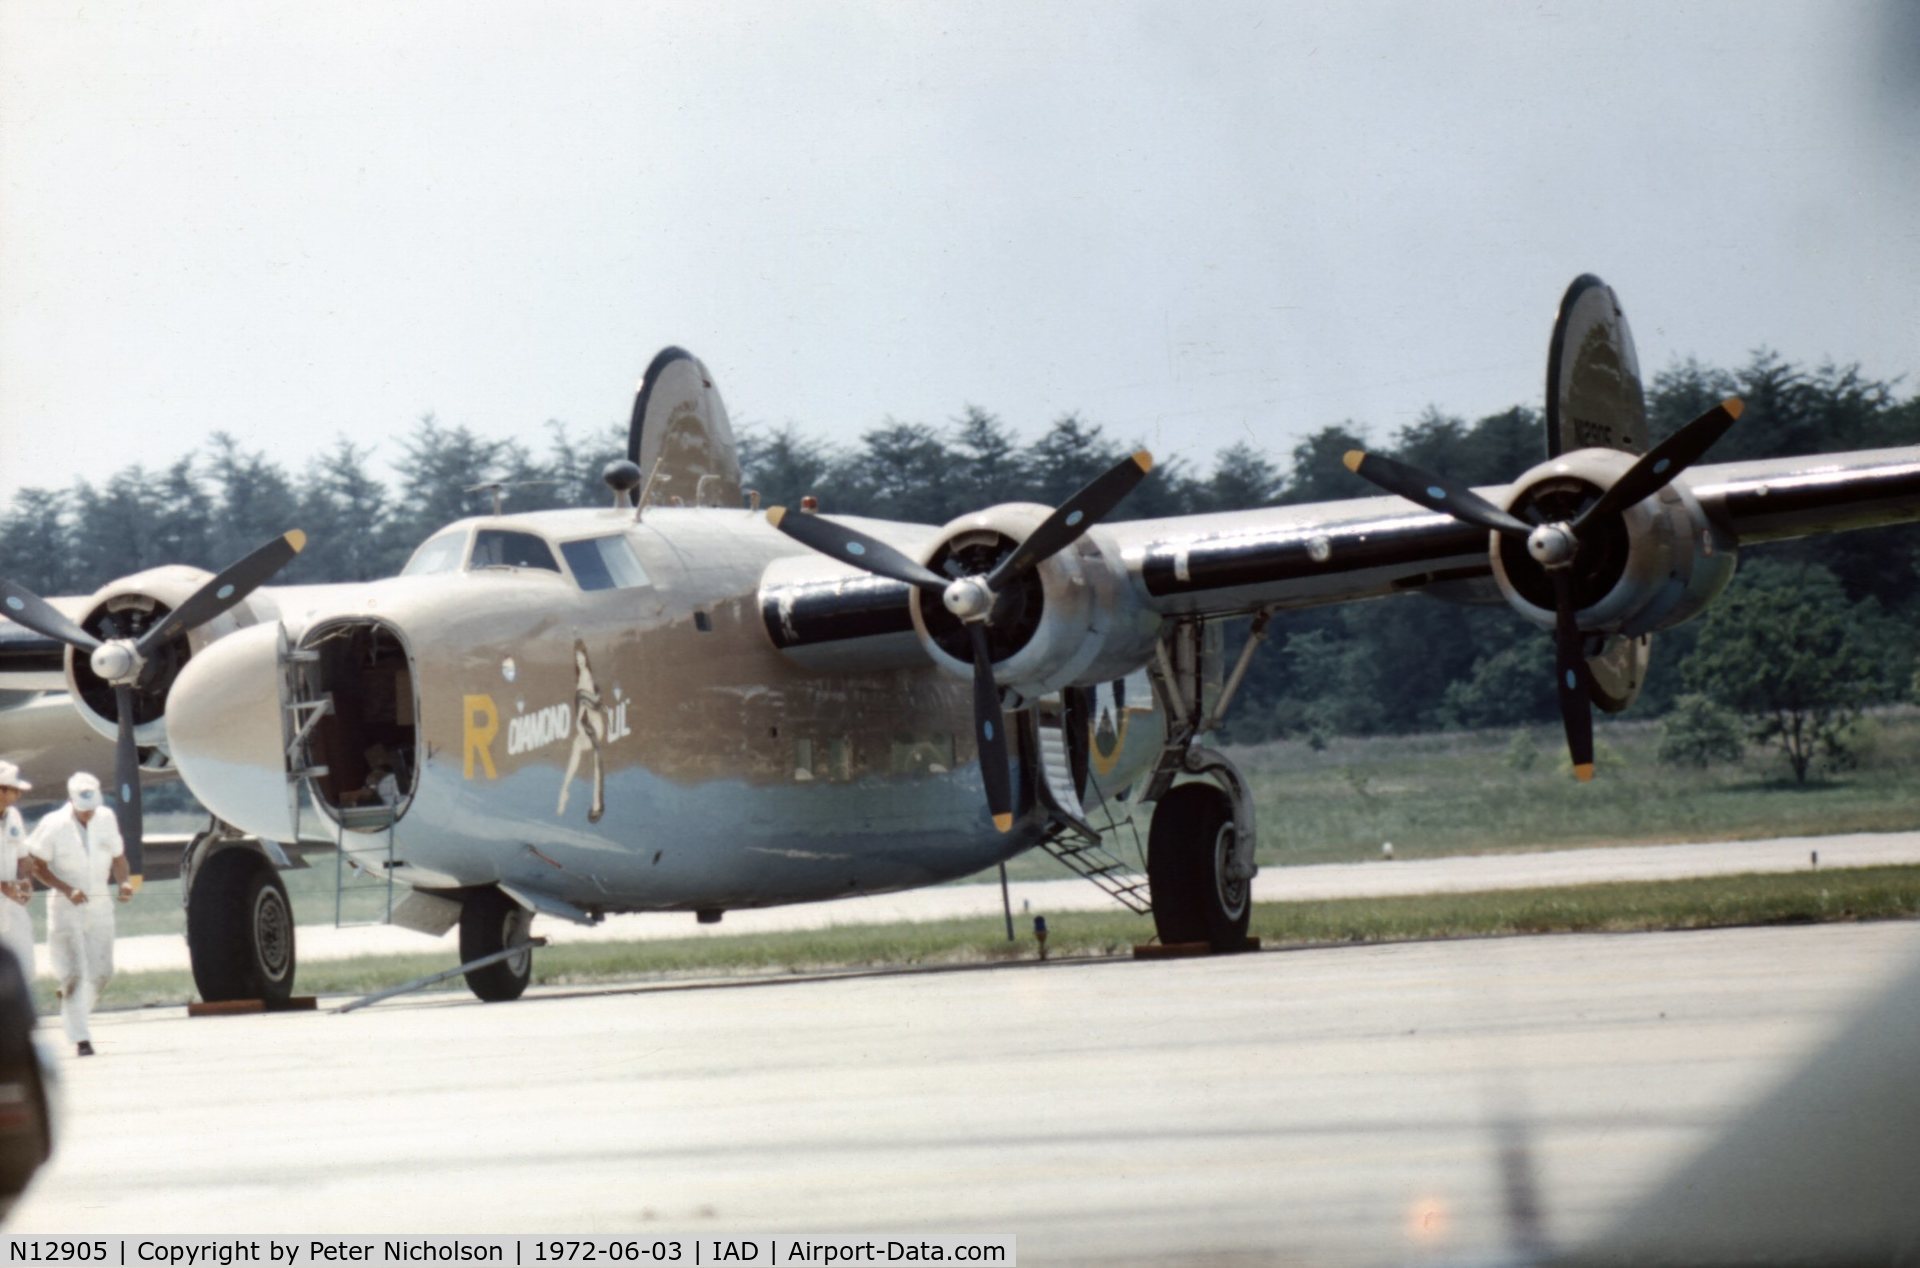 N12905, 1940 Consolidated Vultee RLB30 (B-24) C/N 18, The Confederate Air Force flew their 